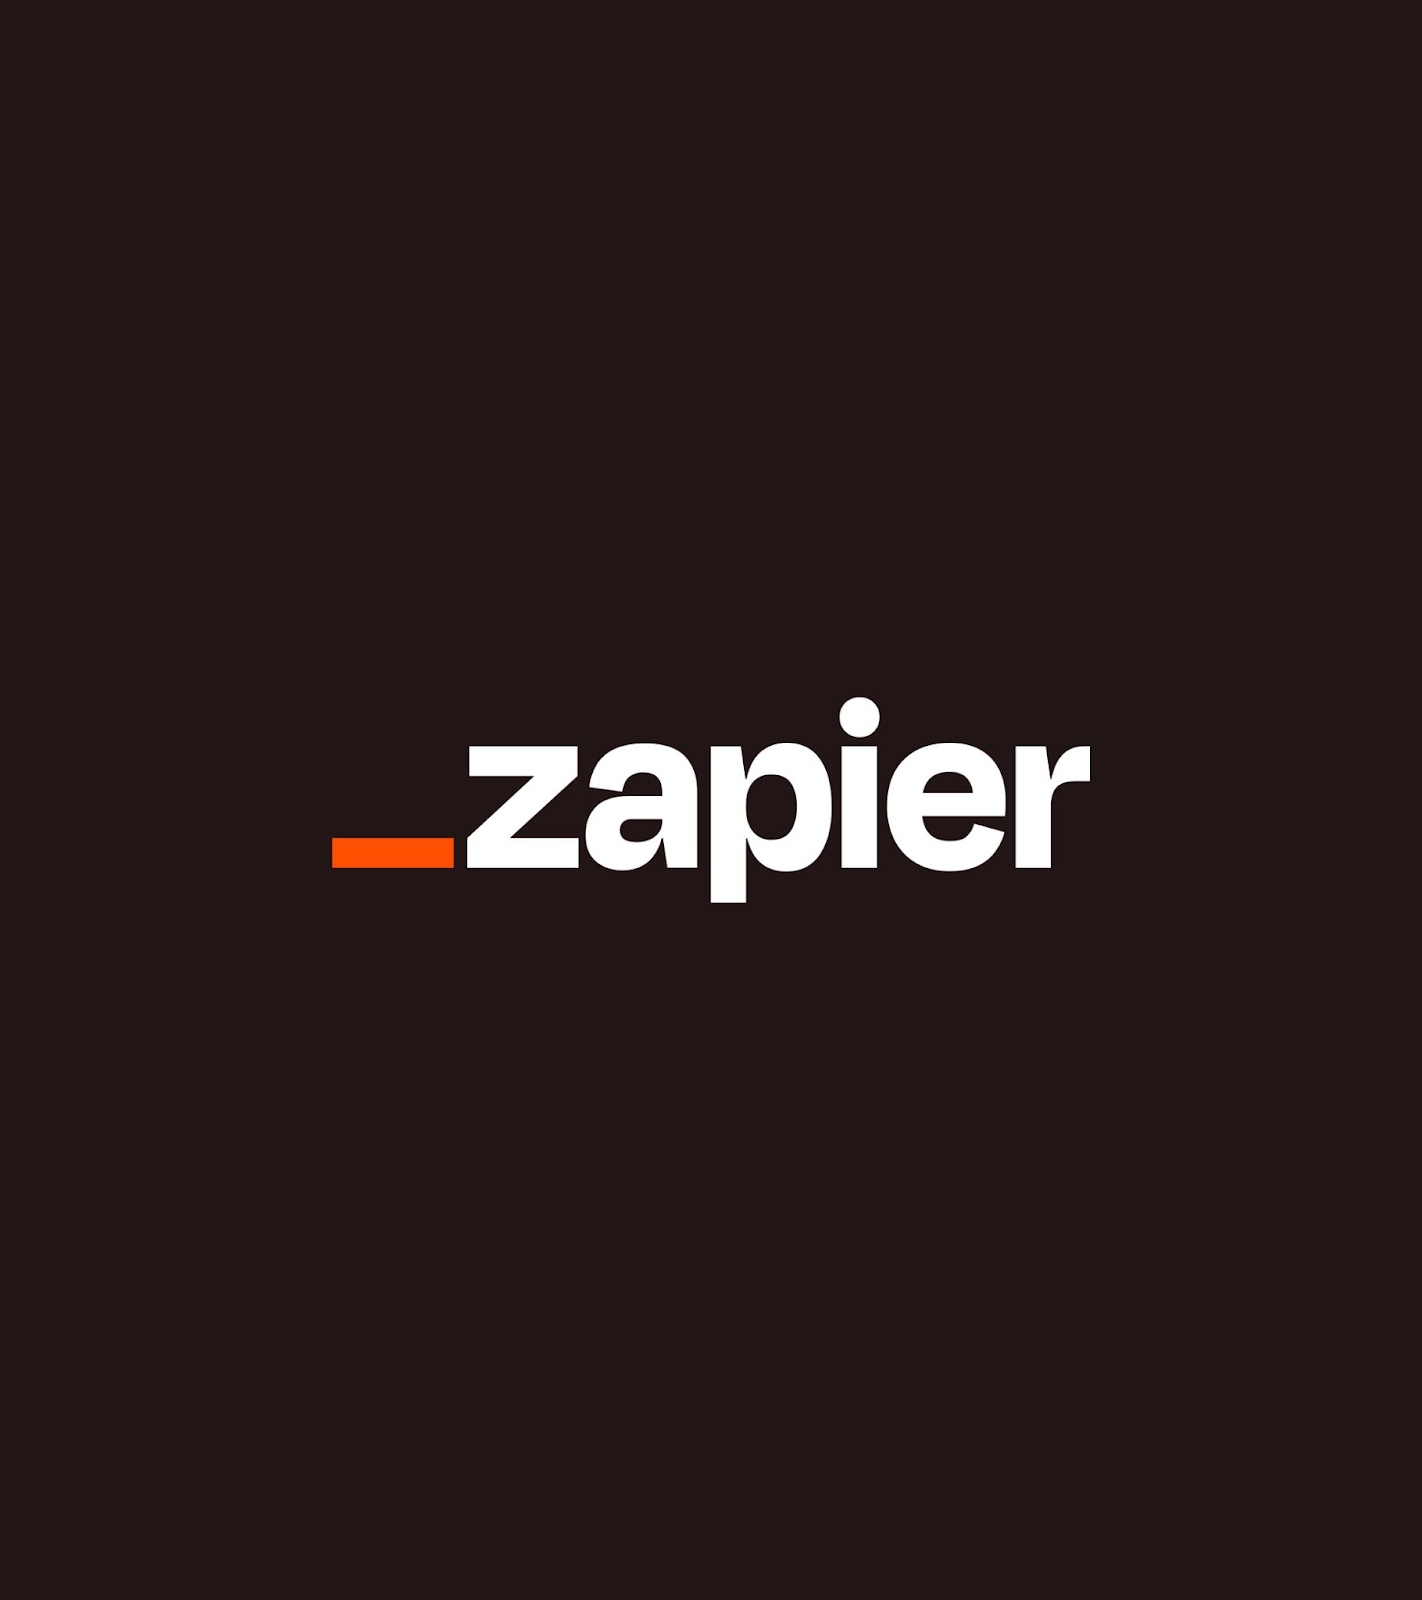 Artifact from the Zapier's Branding & Visual Identity: Motion-Driven Innovation article on Abduzeedo